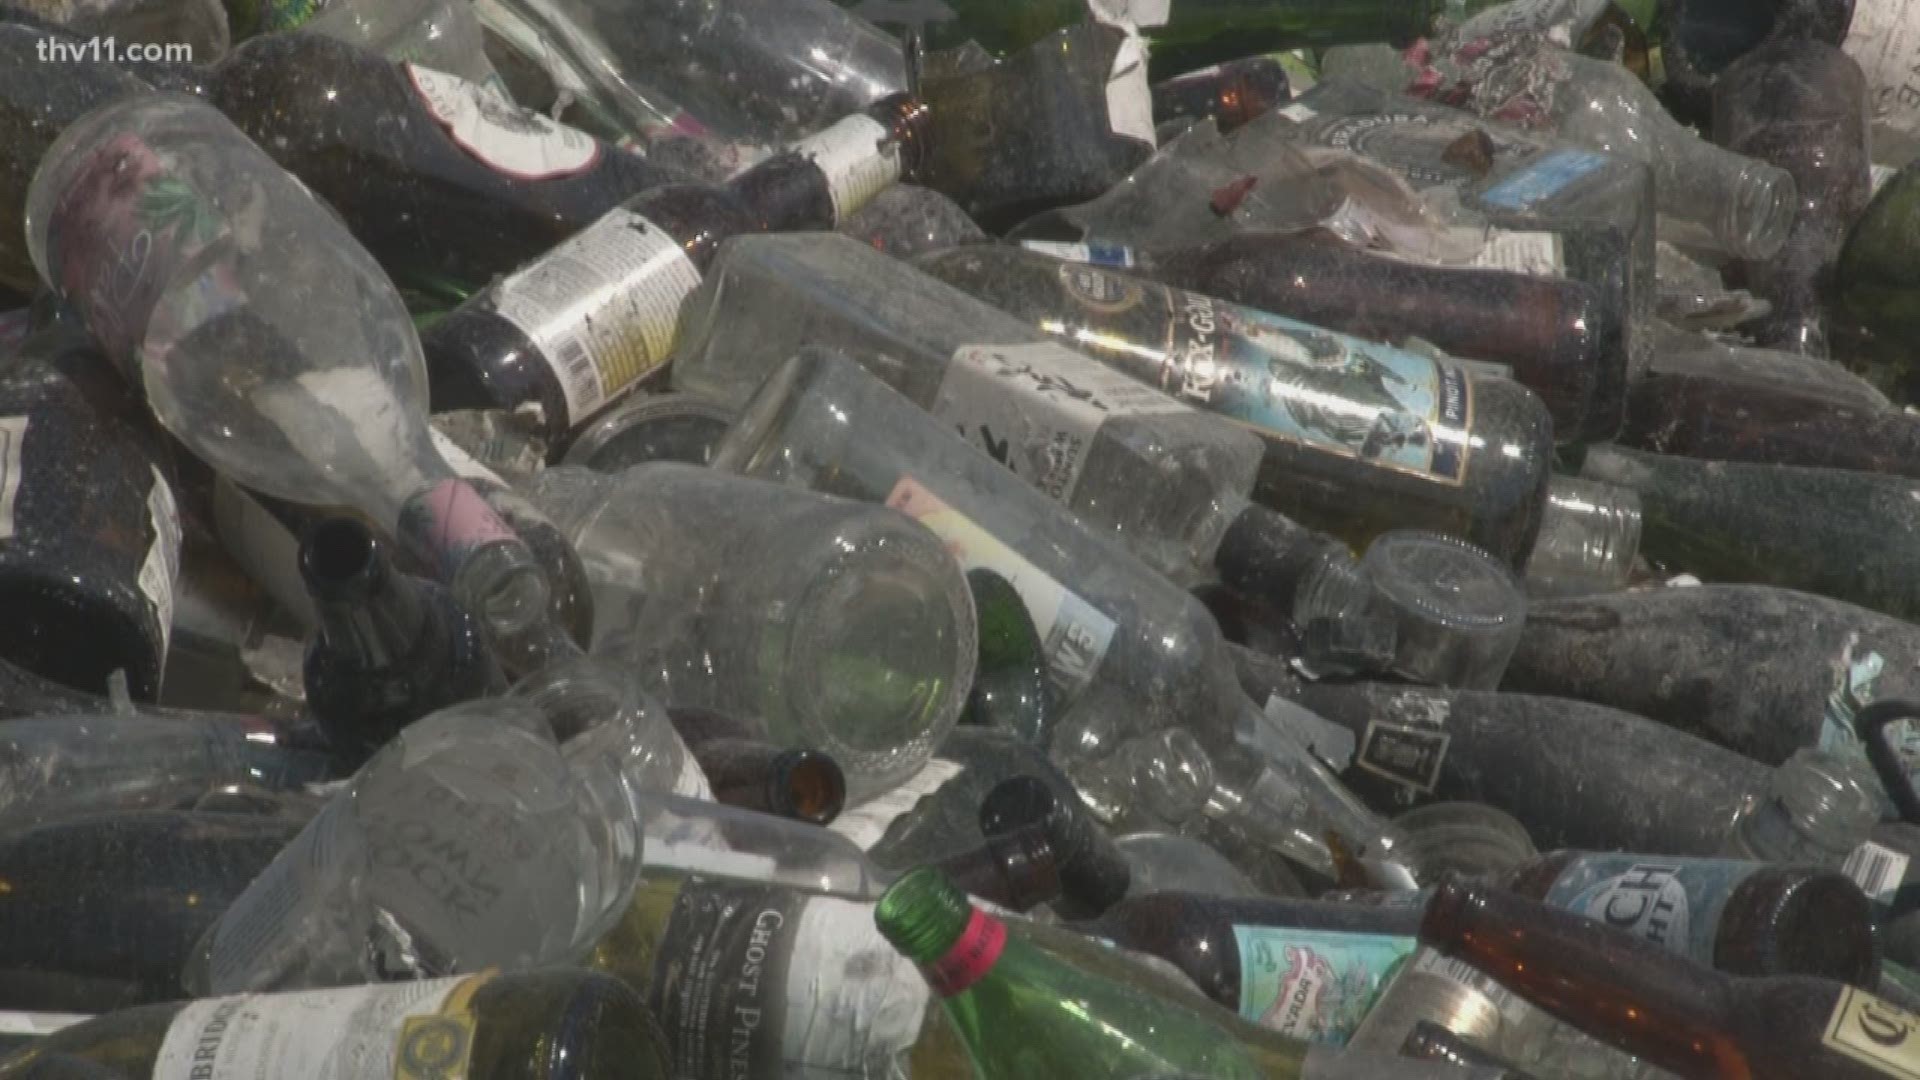 Ace Glass reports 1.8 million pounds of glass have been recycled since April 1 at public bins or through paid pickup service.